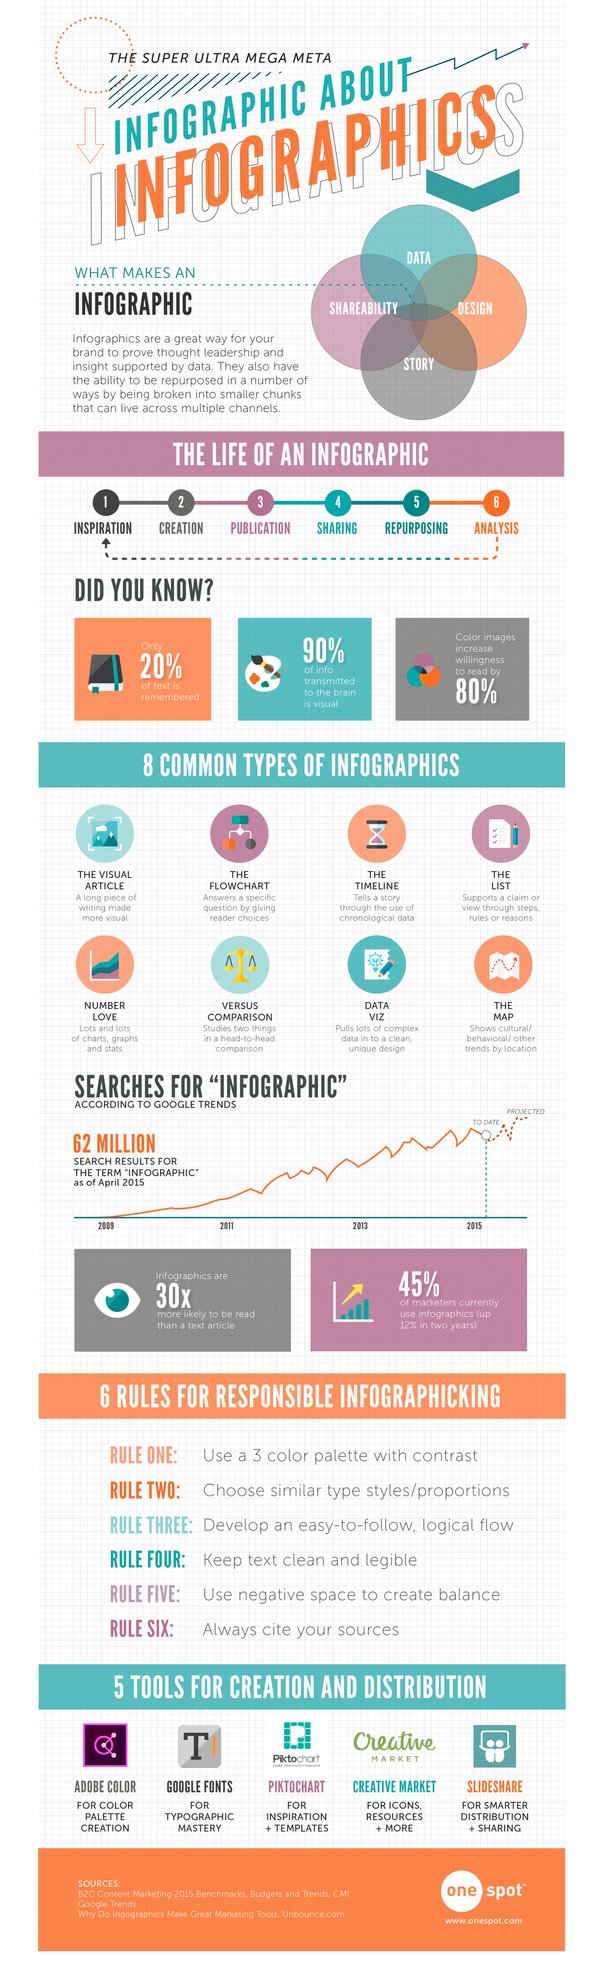 Why Your Marketing Strategy Needs Infographics [Infographic]